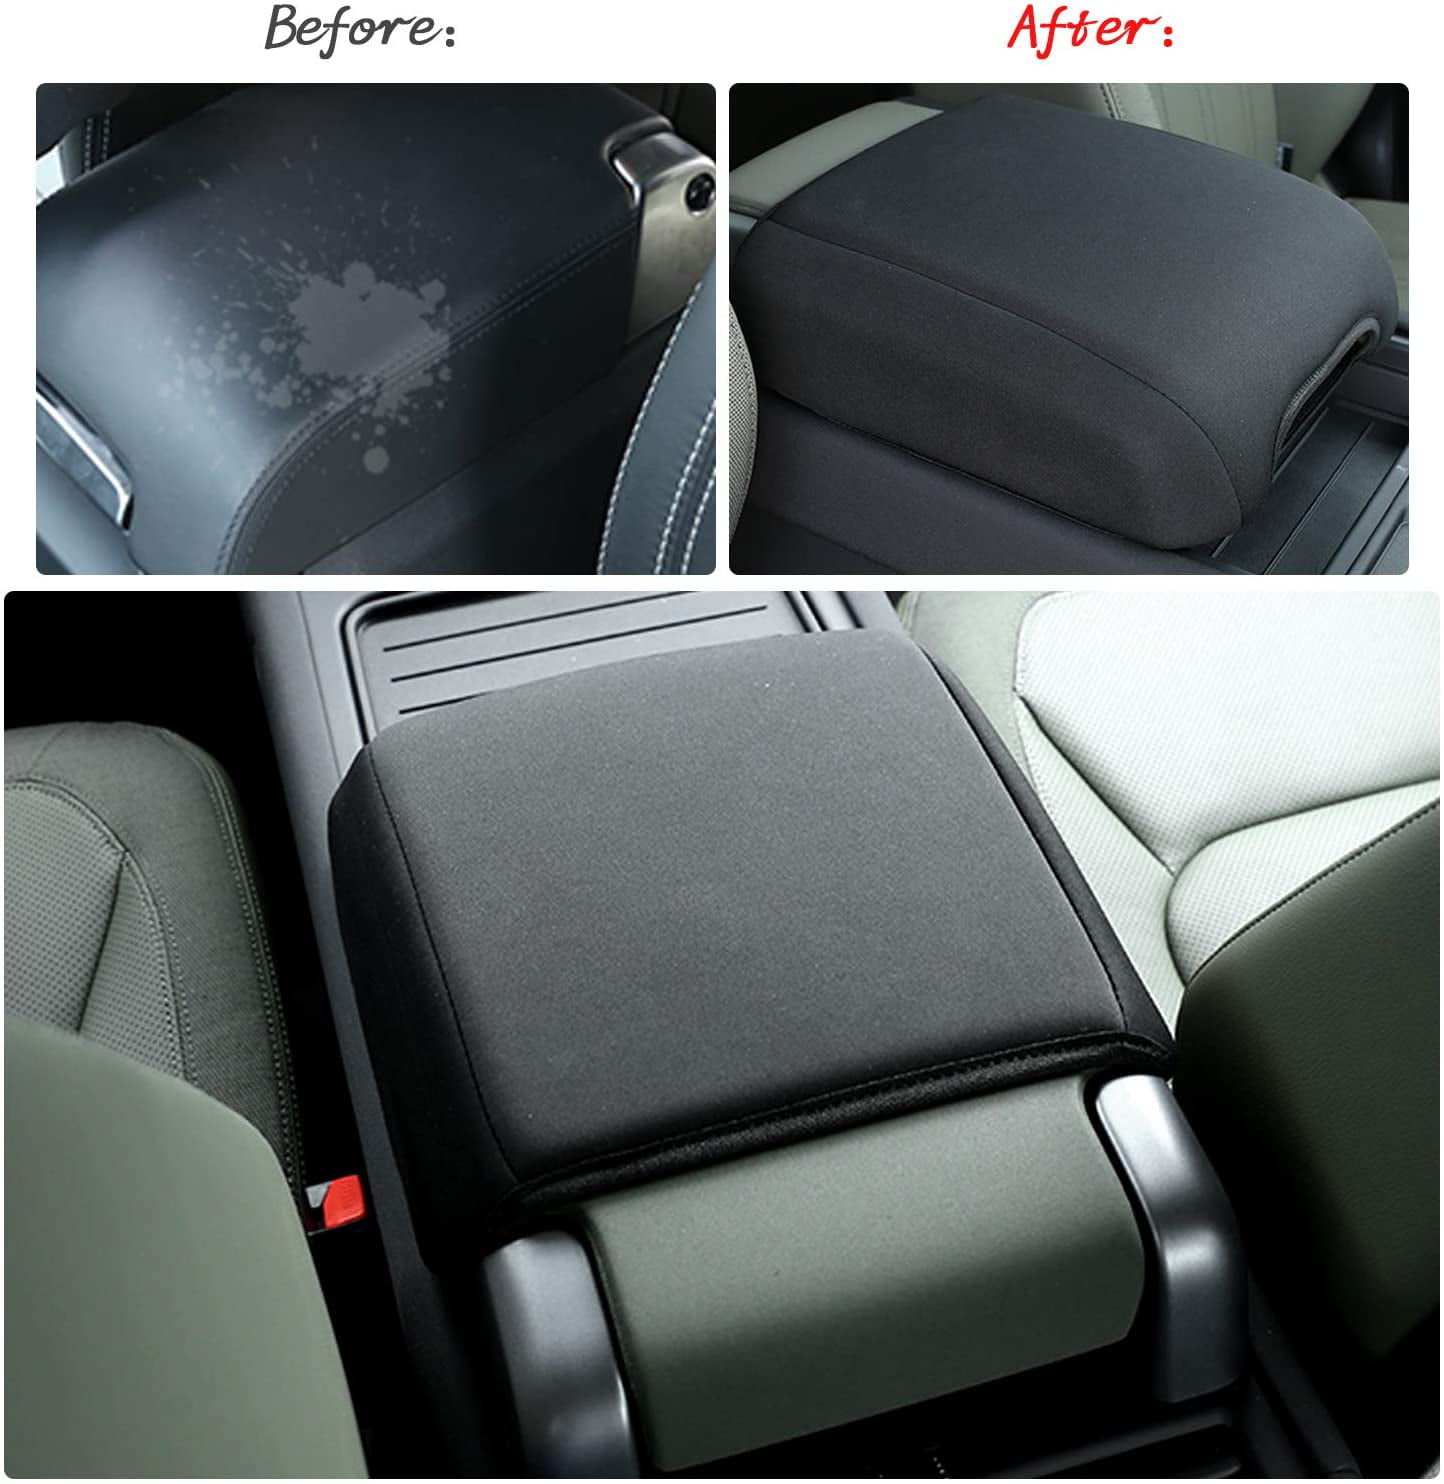 Black R RUIYA Auto Central Console Rest Pad Cover for 2020 Land Rover Defender 90 110 Center Armrest Cushion Soft Pad Automotive Protector Anti-Scratch 